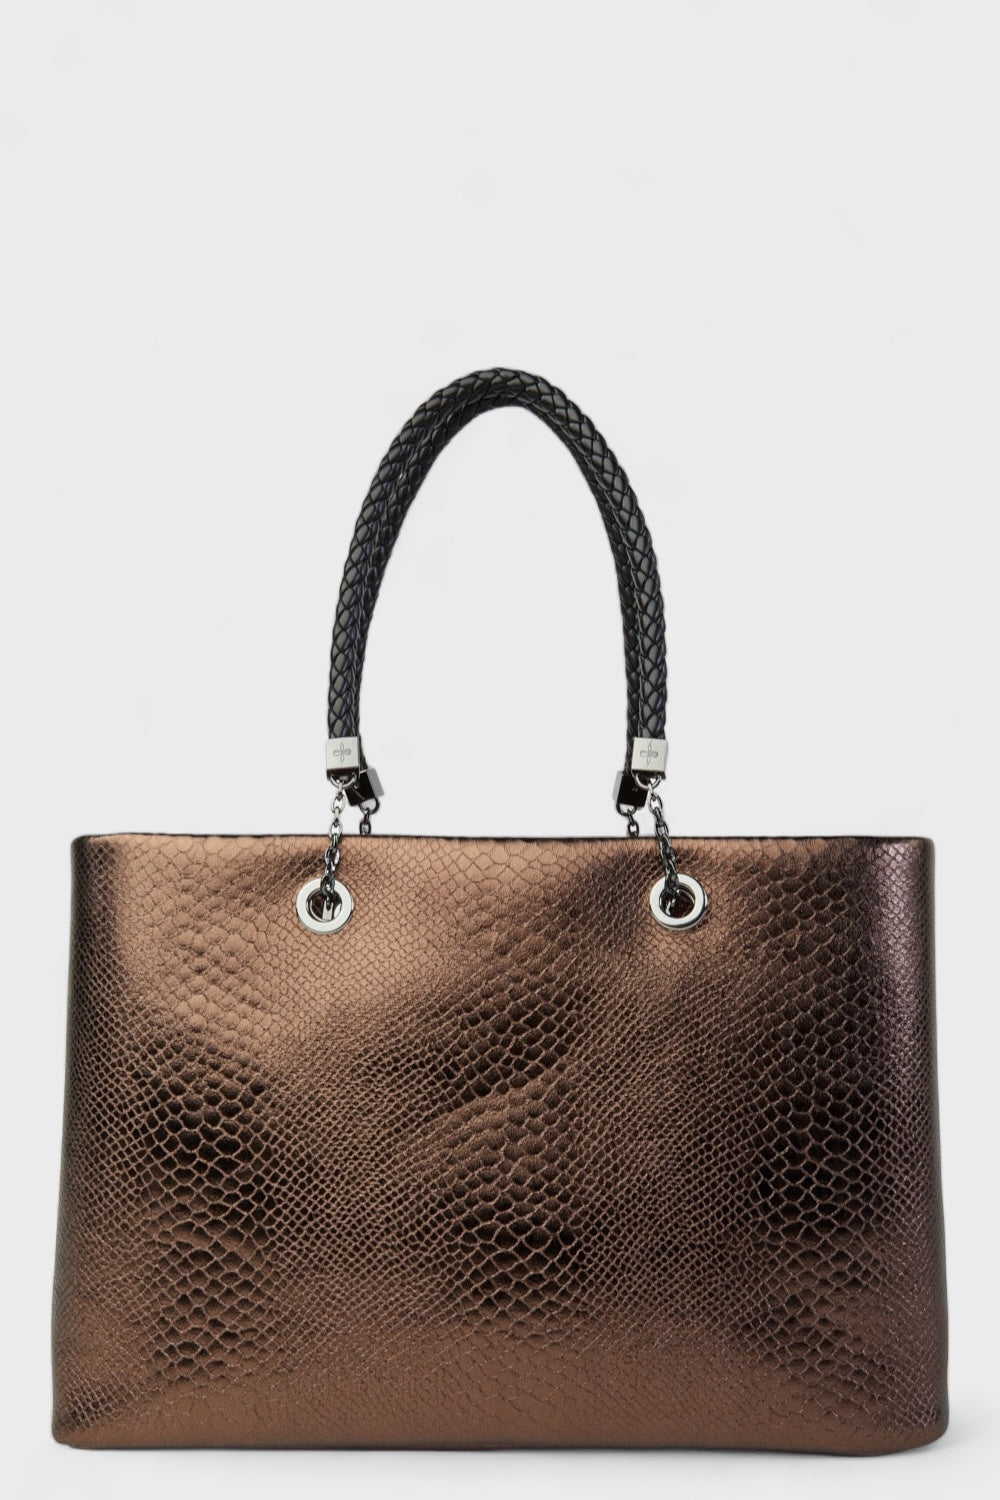 Abree Brown Croc Embossed  Interchangeable Tote Bag  by TailorYourChoiceS Italian Women's Fashion Bags